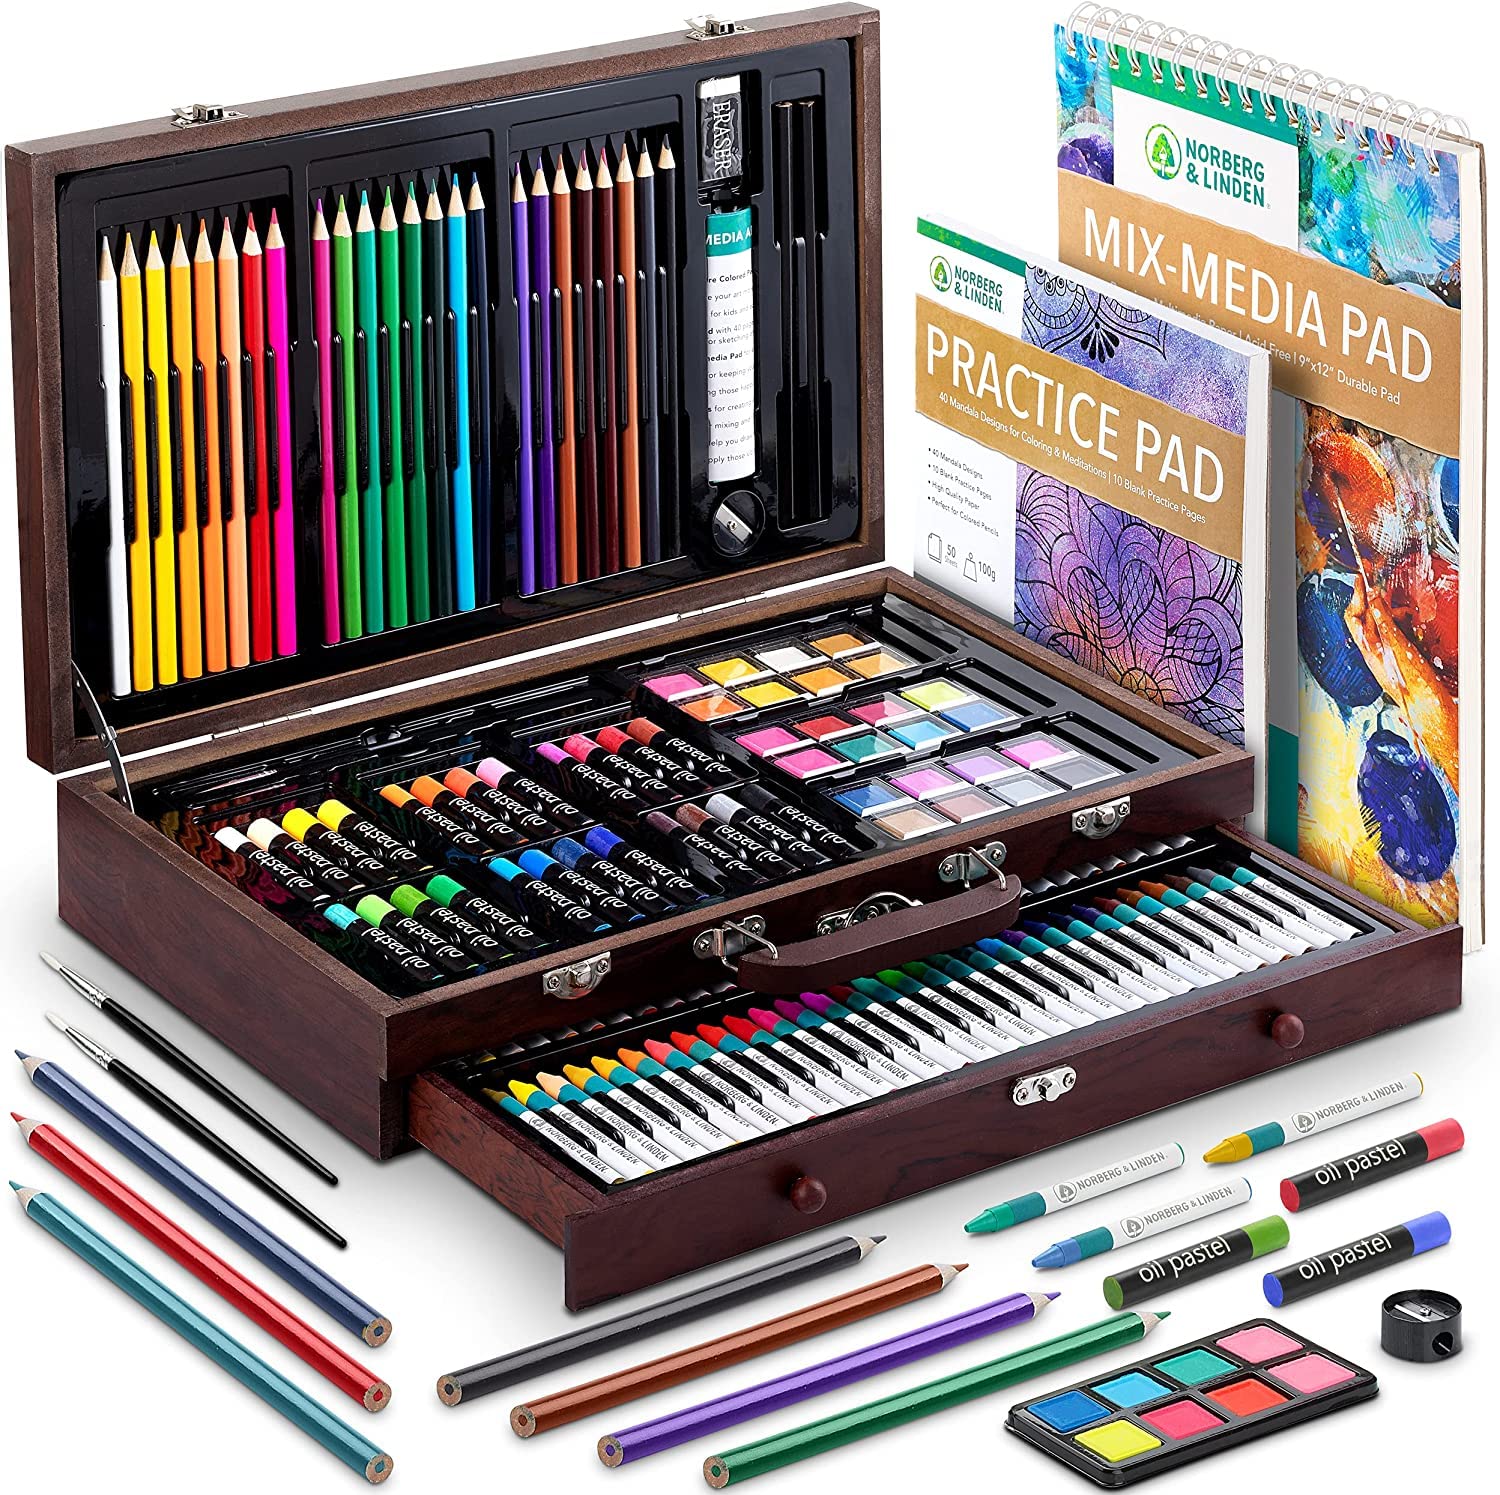 Norberg & Linden XL Drawing Set - Sketching, Graphite and Charcoal Pencils.  Includes 100 Page Drawing Pad, Kneaded Eraser, Blending Stump. Art Kit and